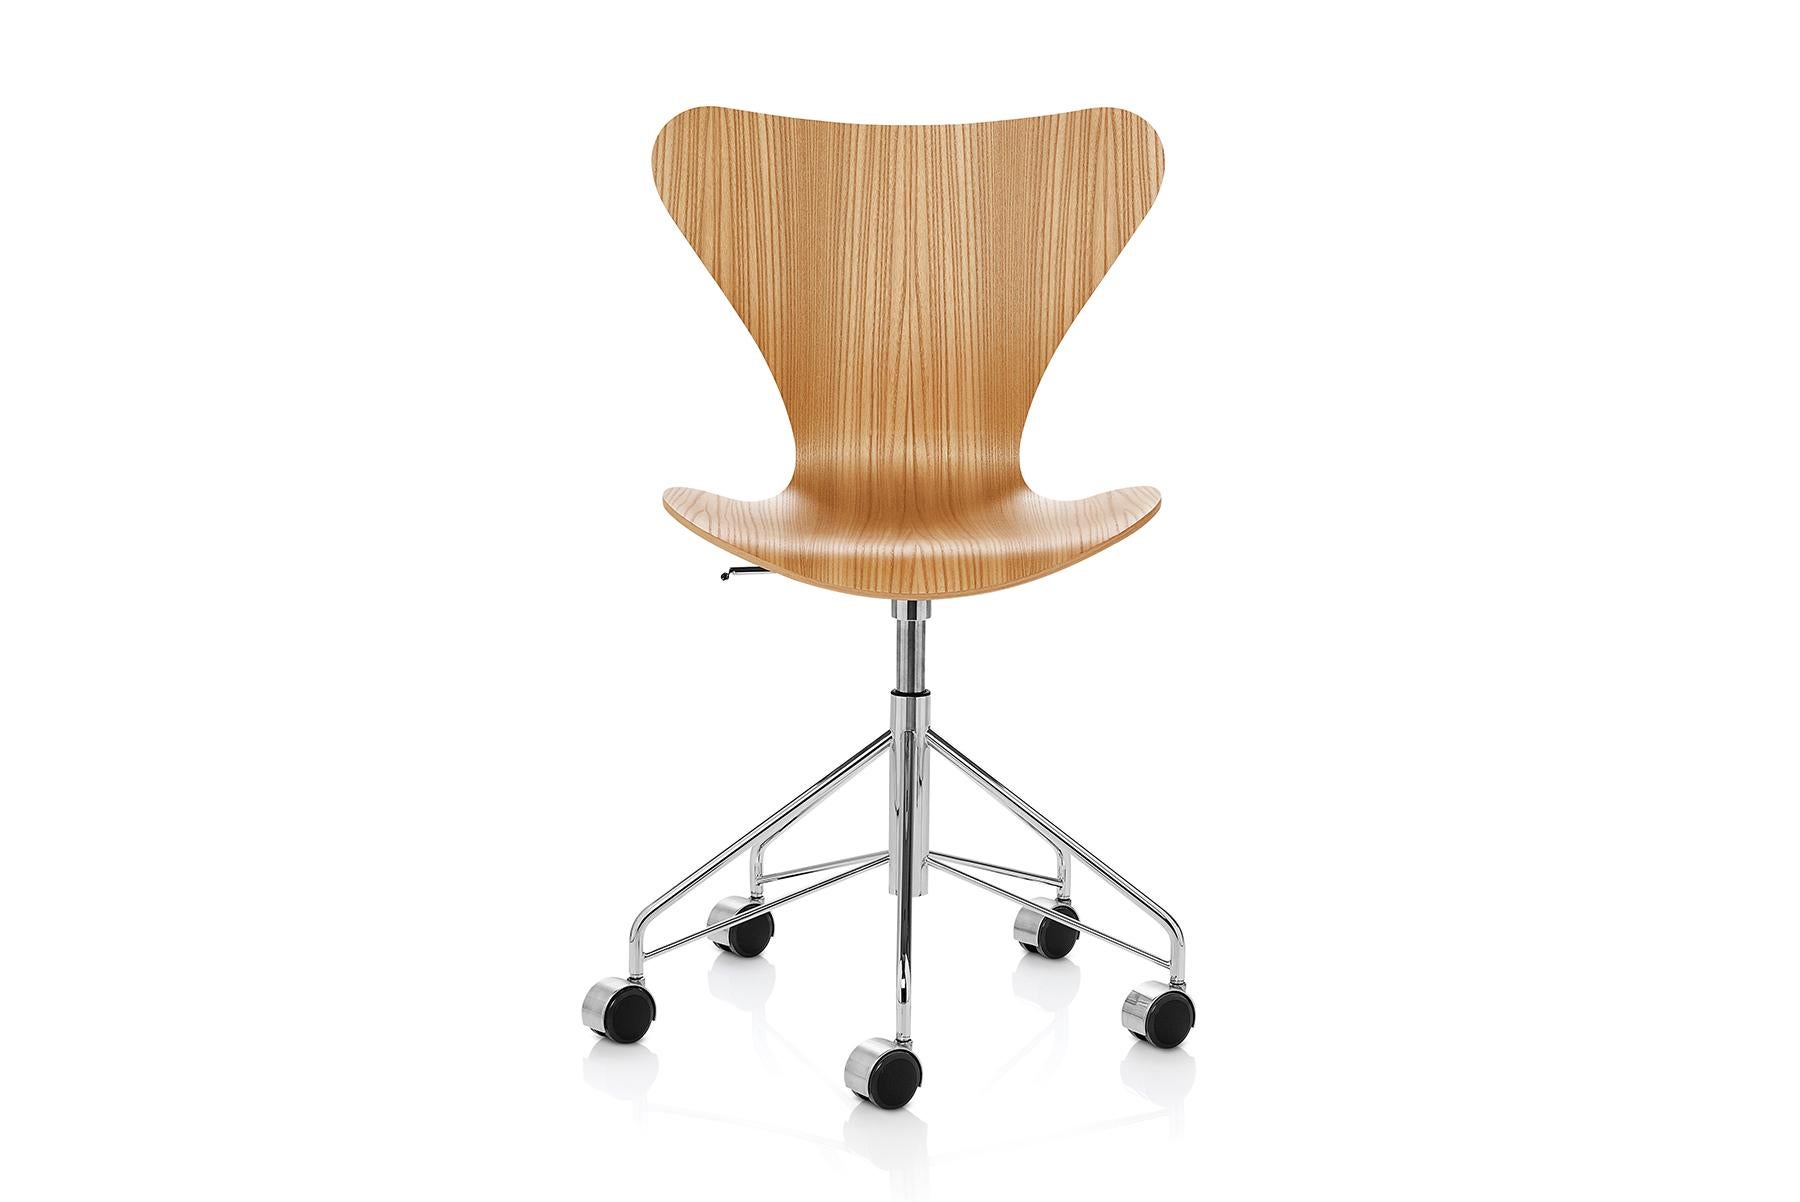 Explore the iconic Series 7 chair with a functional swivel base. The four-legged stackable chair represents the culmination of the lamination technique. The visionary Arne Jacobsen exploited the possibilities of lamination to perfection resulting in